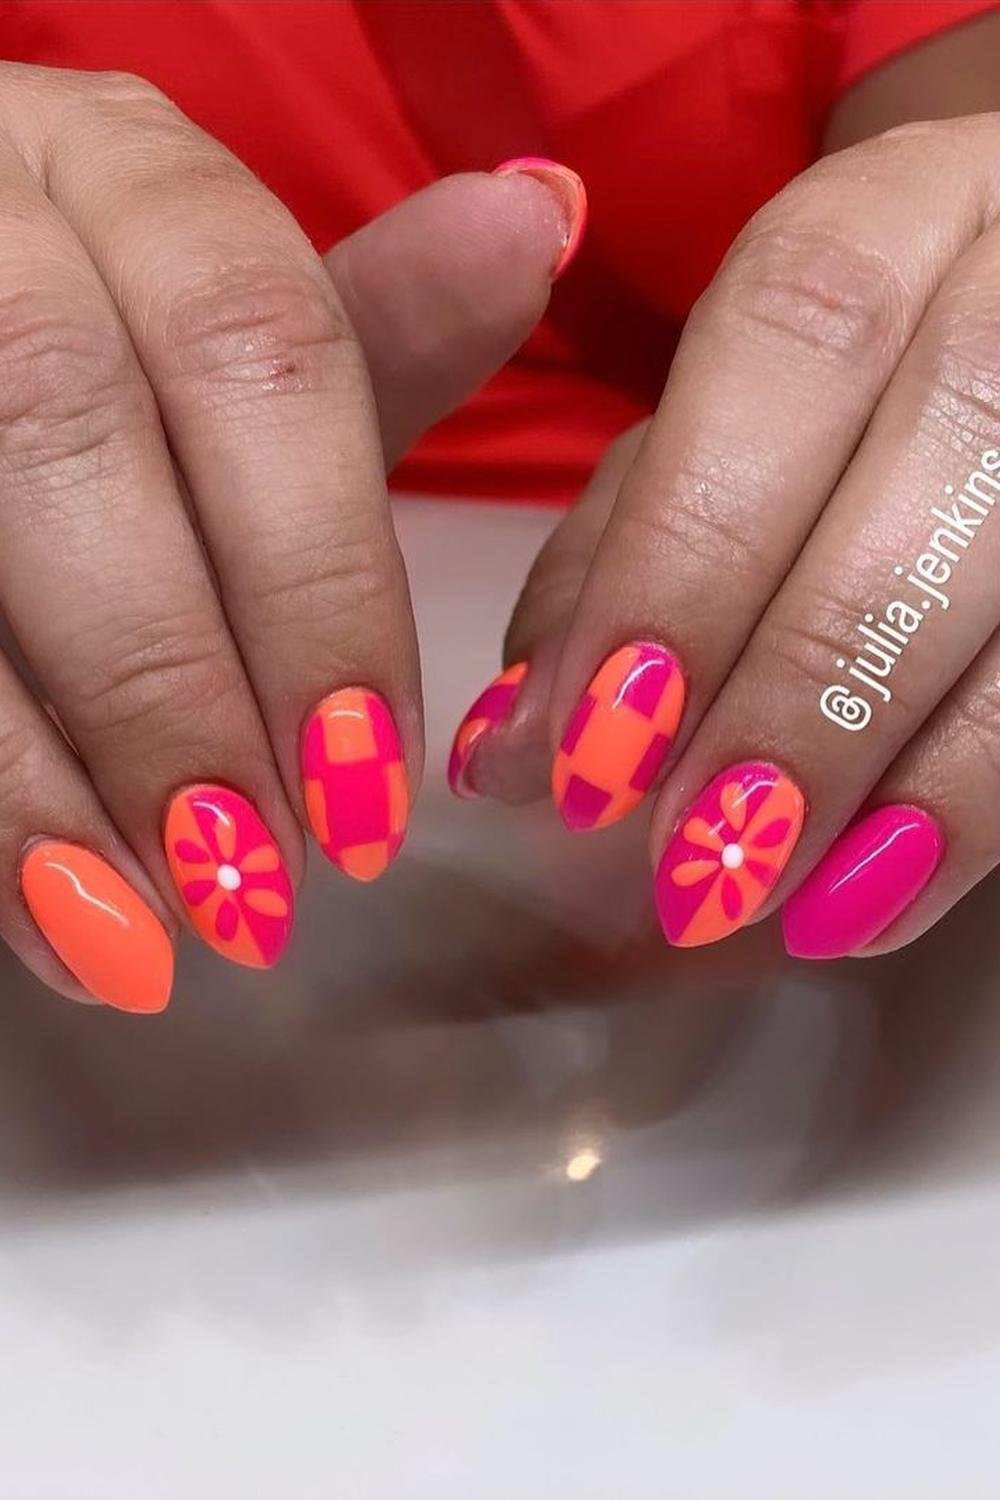 34 - Picture of Pink and Orange Nails